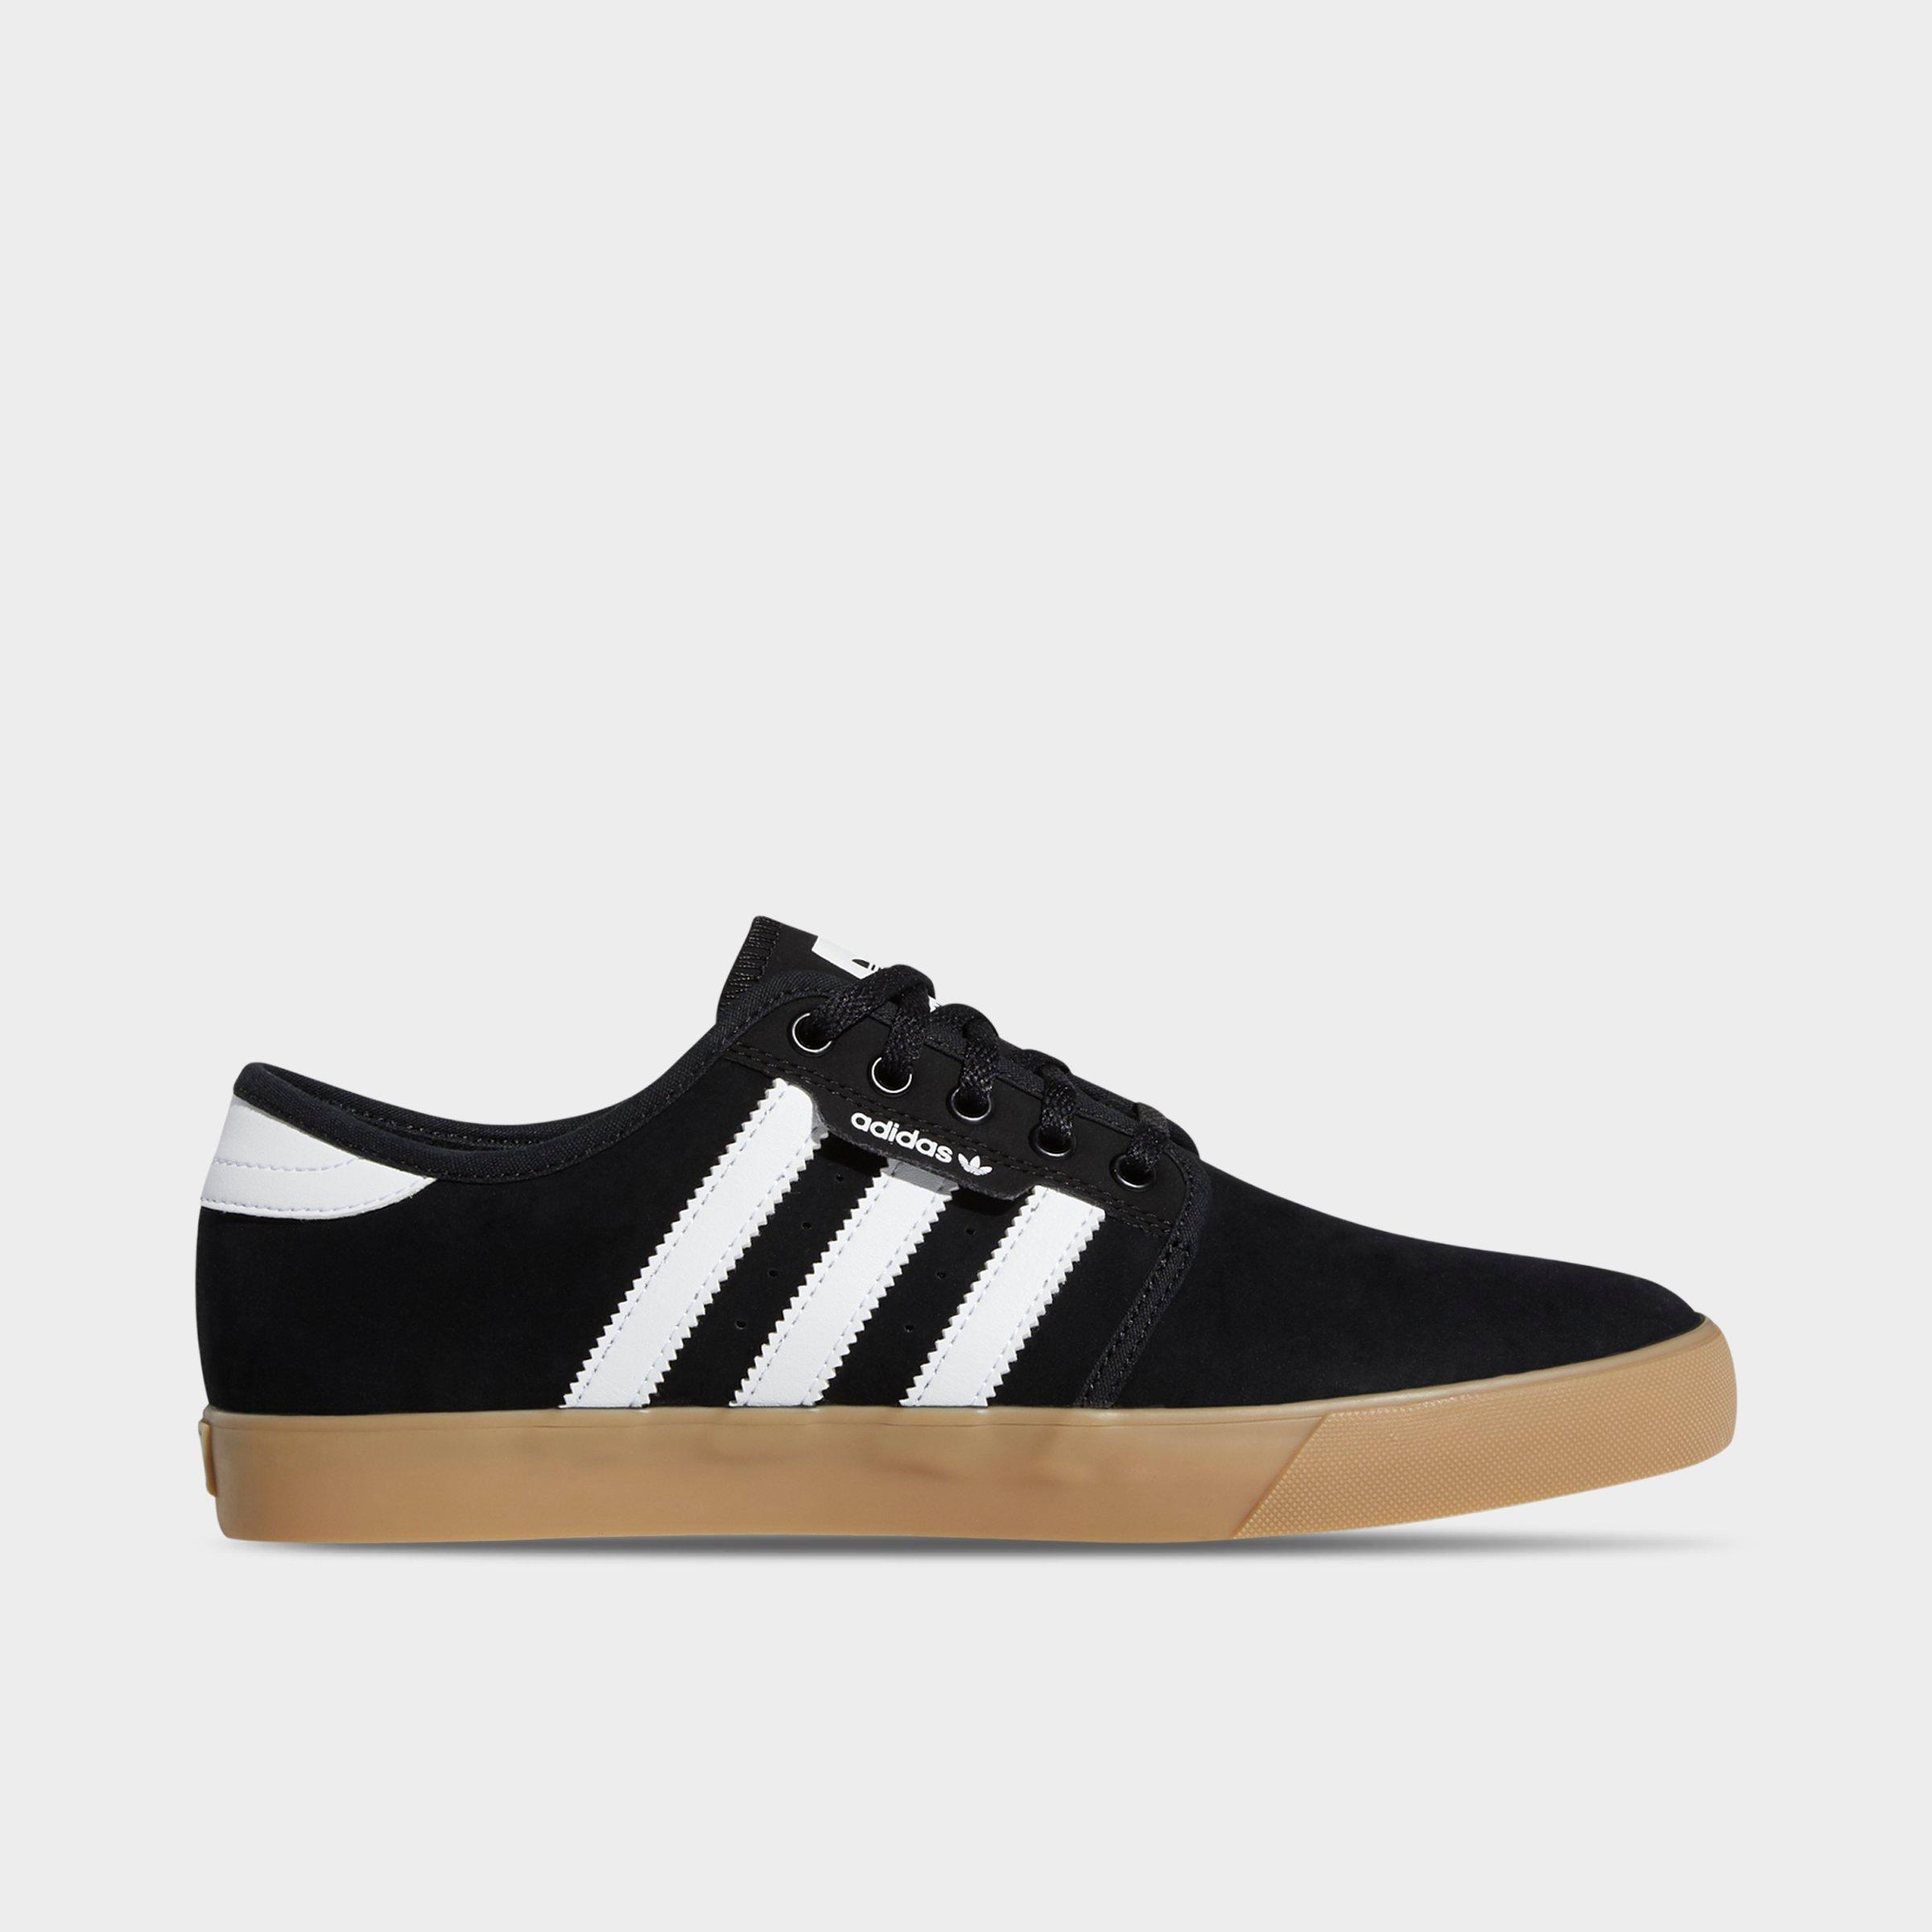 adidas with rubber sole